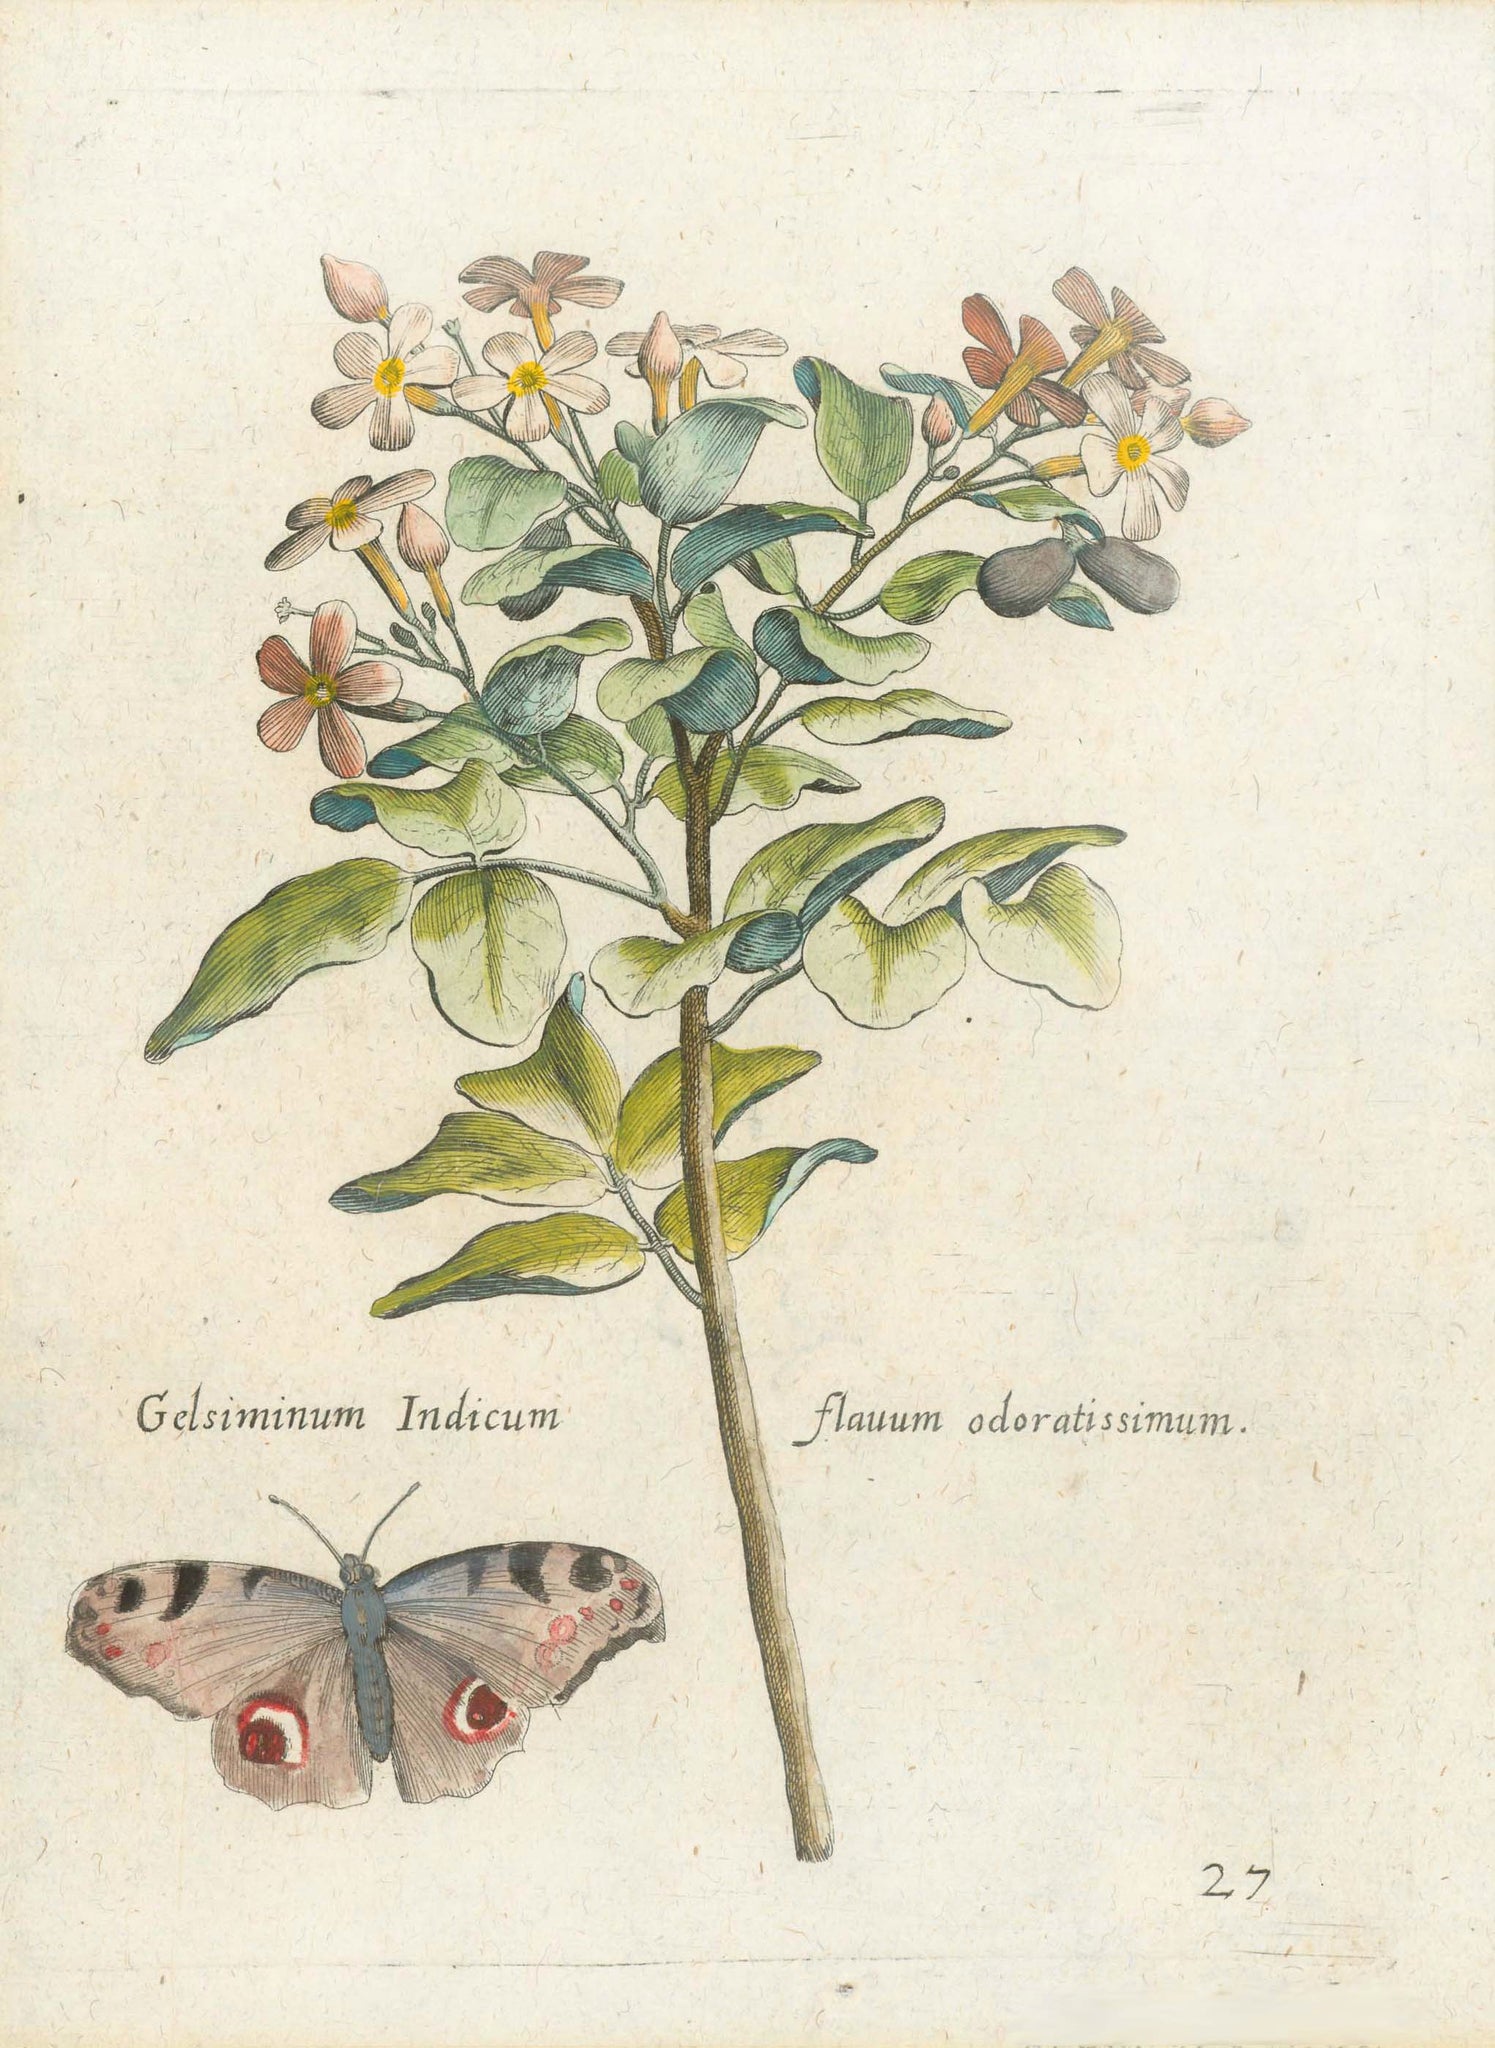    "Gelsiminum Indicum flaum odoratissimum"  Plate 27  Johann Theodor De Bry (1528-1598) came from Liege, Belgium to Frankfurt on the Main and founded about 1570 an important publishing house. The famousFlorilegium Novum, a comprehensive flower book was first published by his son, Johann Theodor De Bry (1561-1623) between 1612 and 1618. The copper engravings we are offering are in very good condition in beautiful modern coloring and are mostly from the 1641 edition